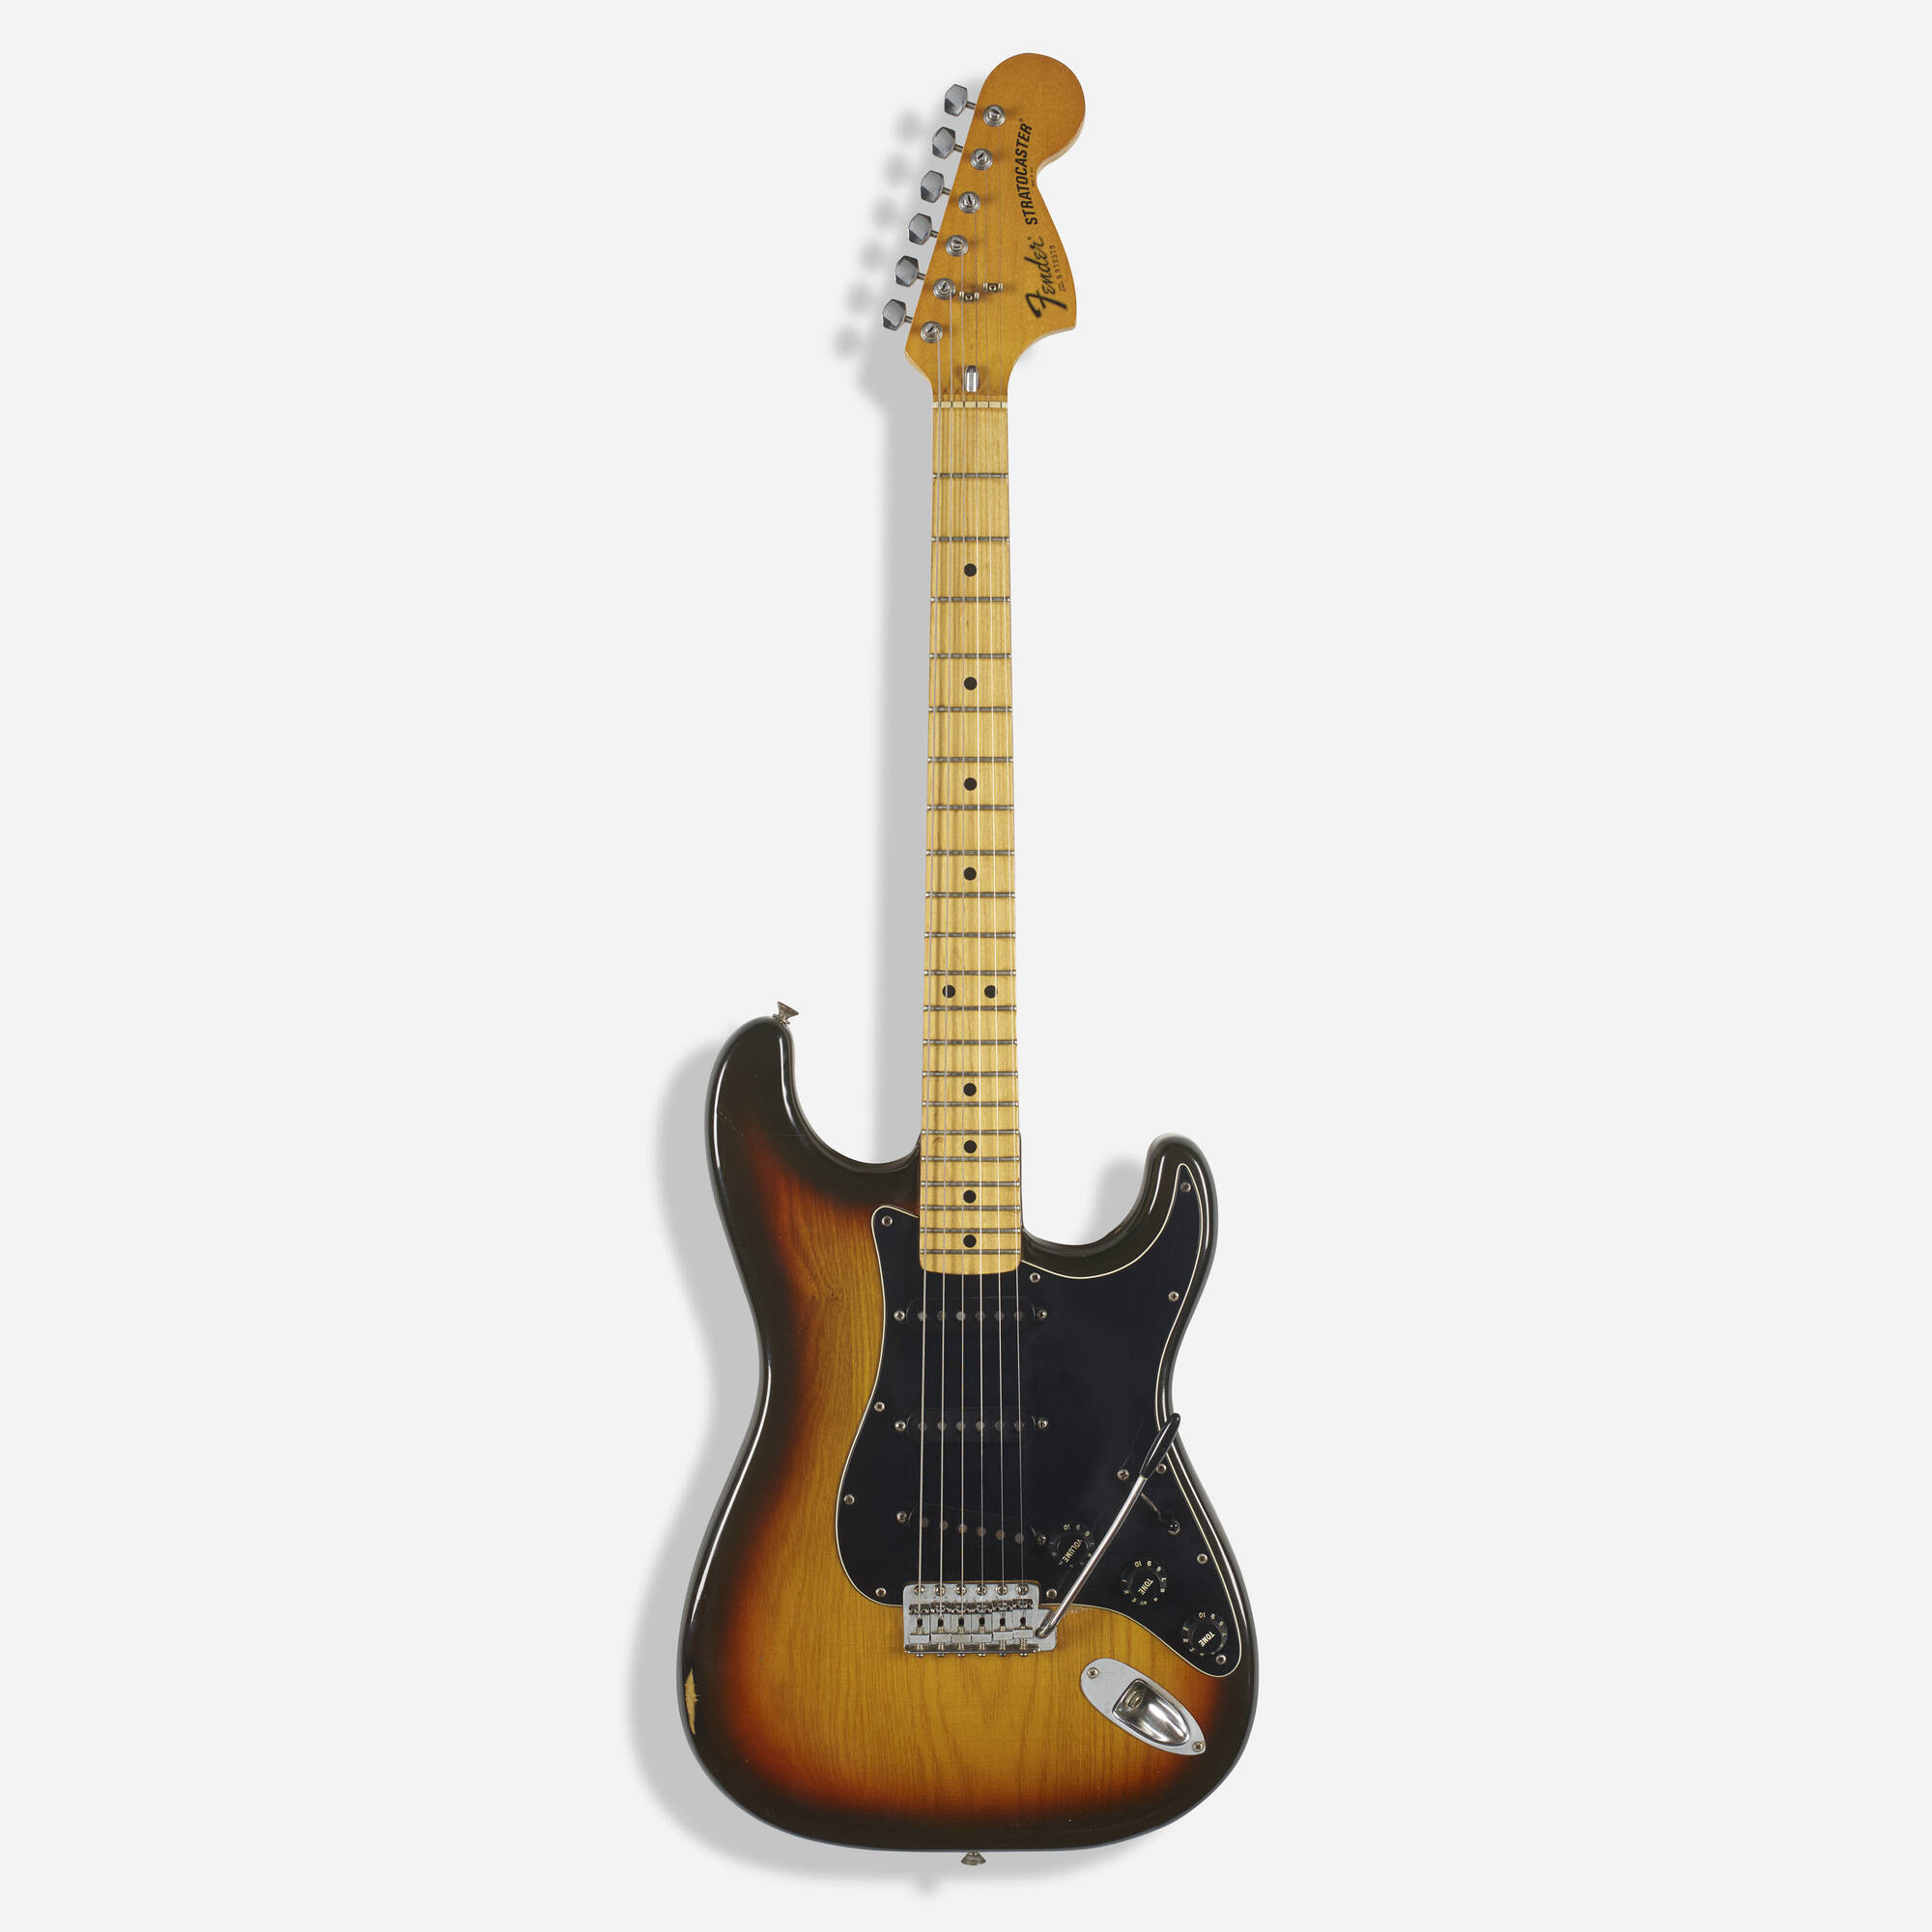 216: FENDER, 1979 Stratocaster electric guitar < Rock Style from